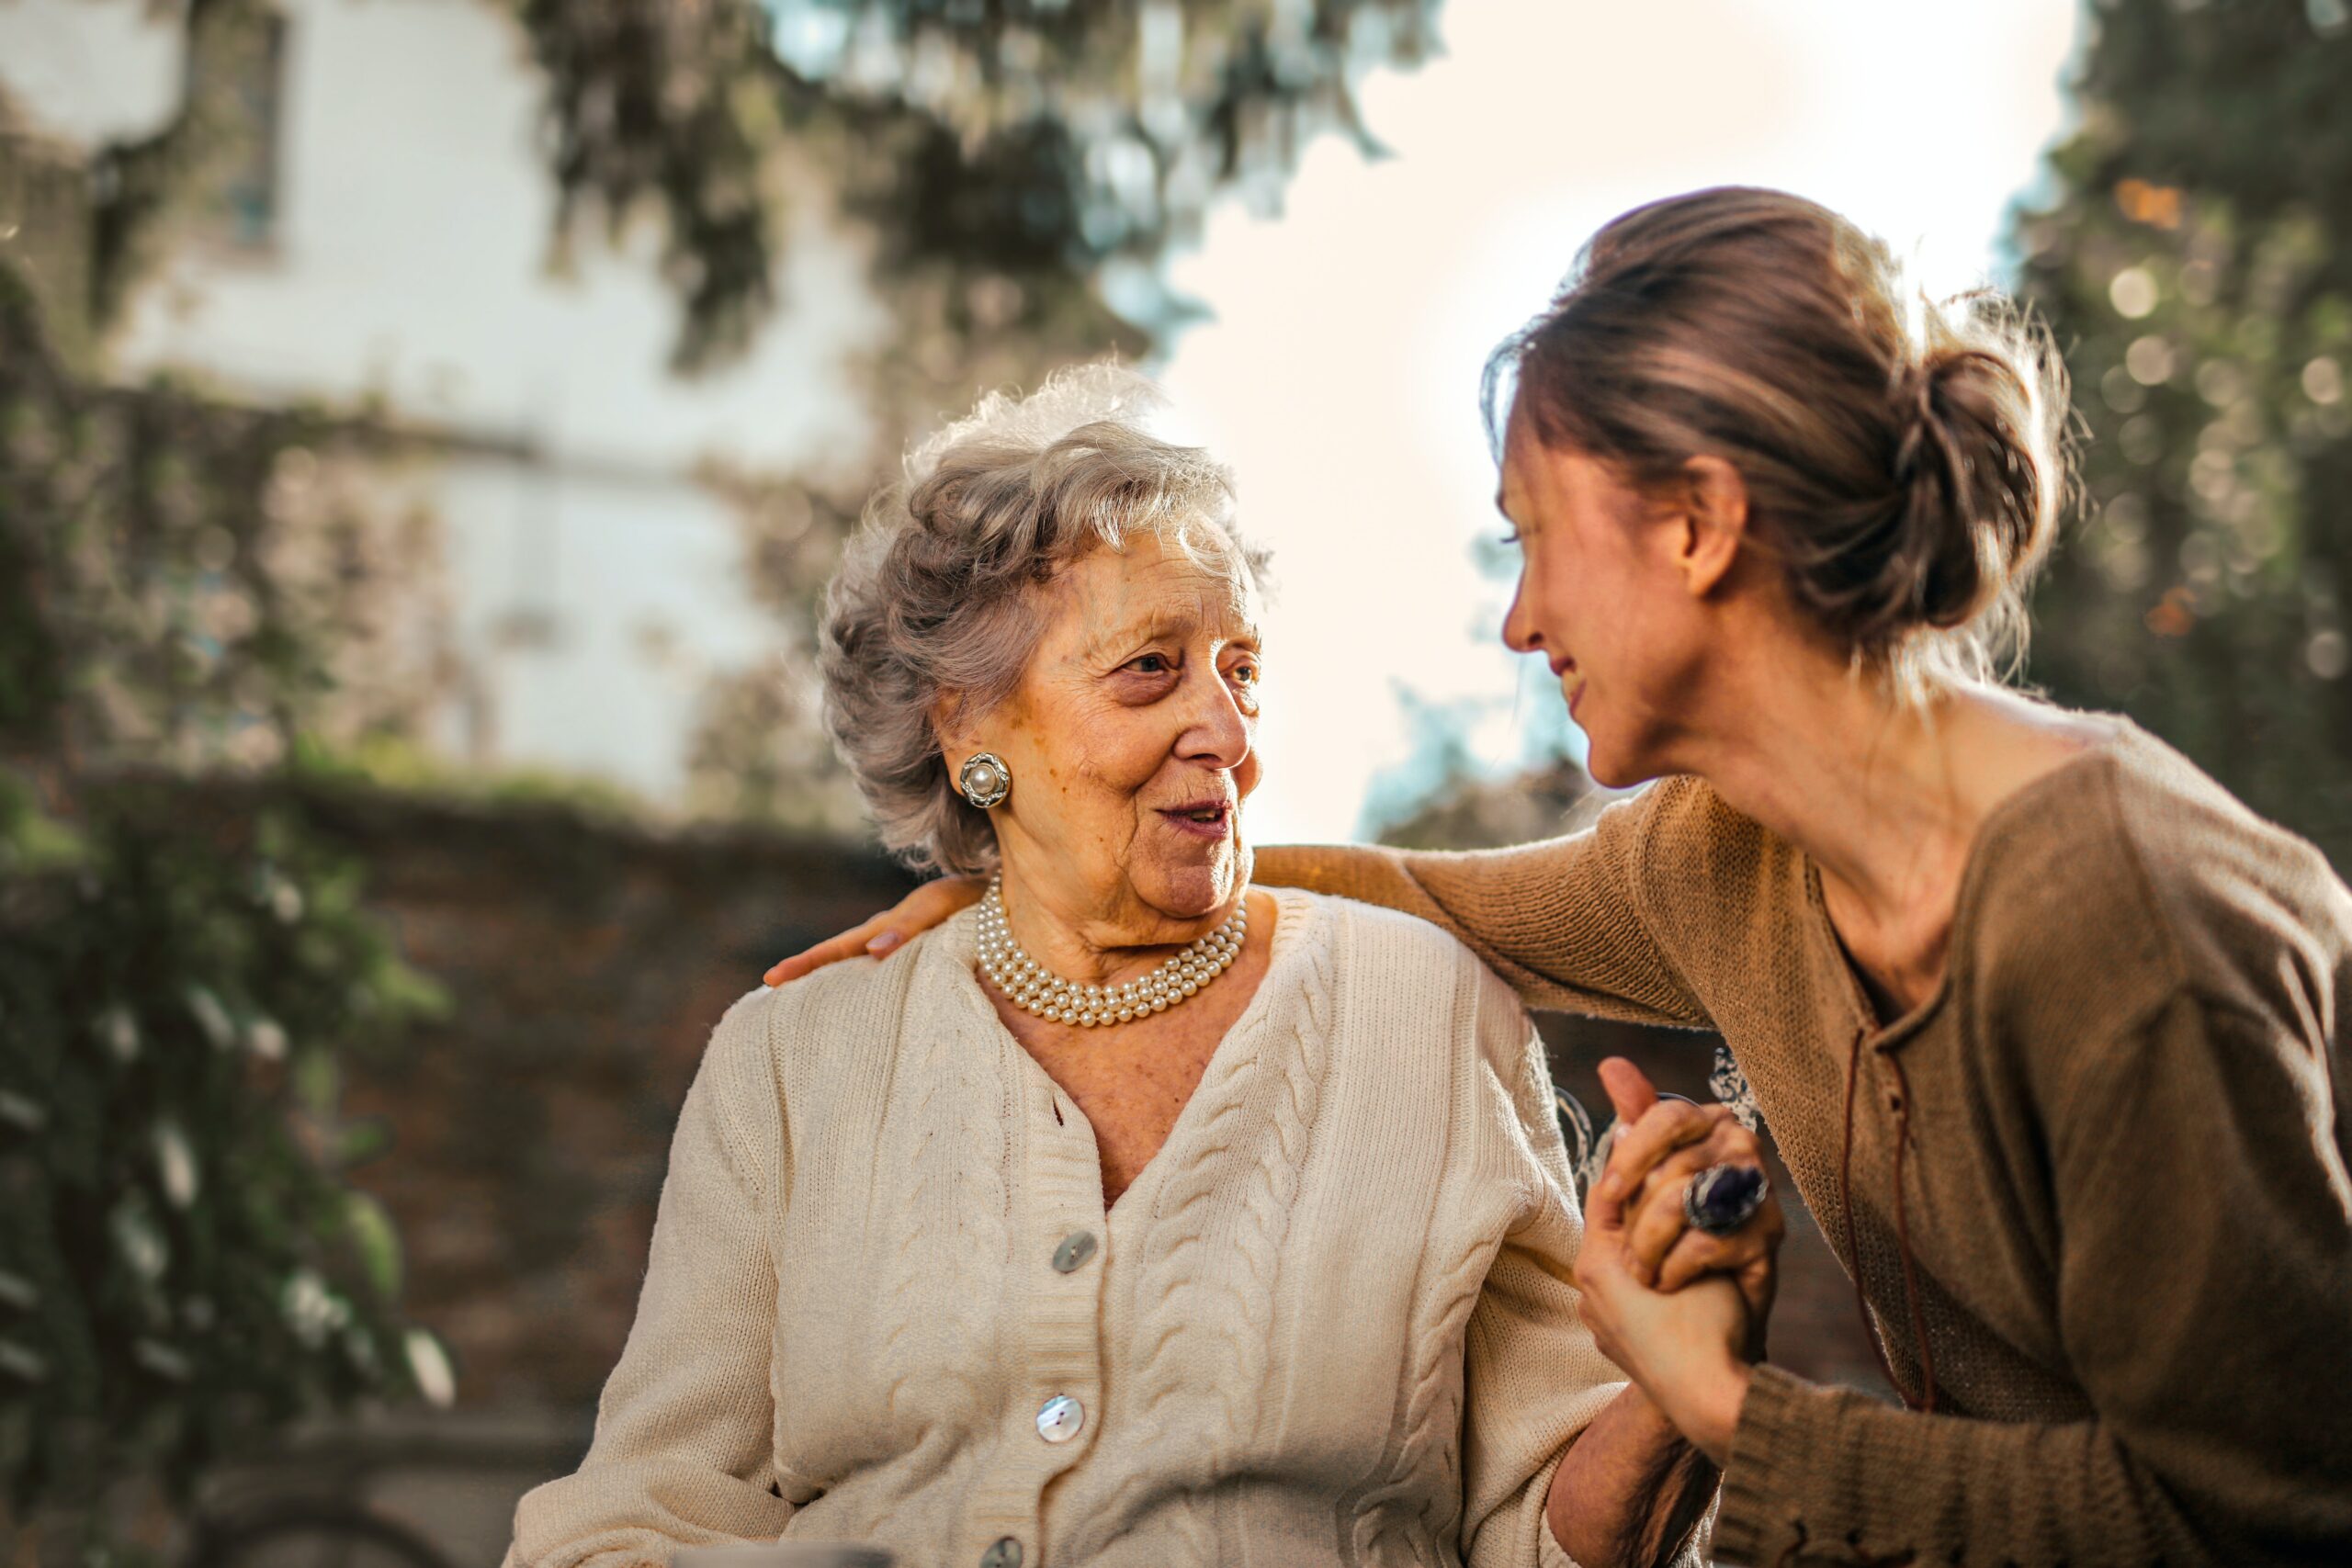 Elderly mother and her daughter sitting outdoors, deeply engaged in conversation as the mother shares her life stories, portraying a moment of intergenerational bonding.